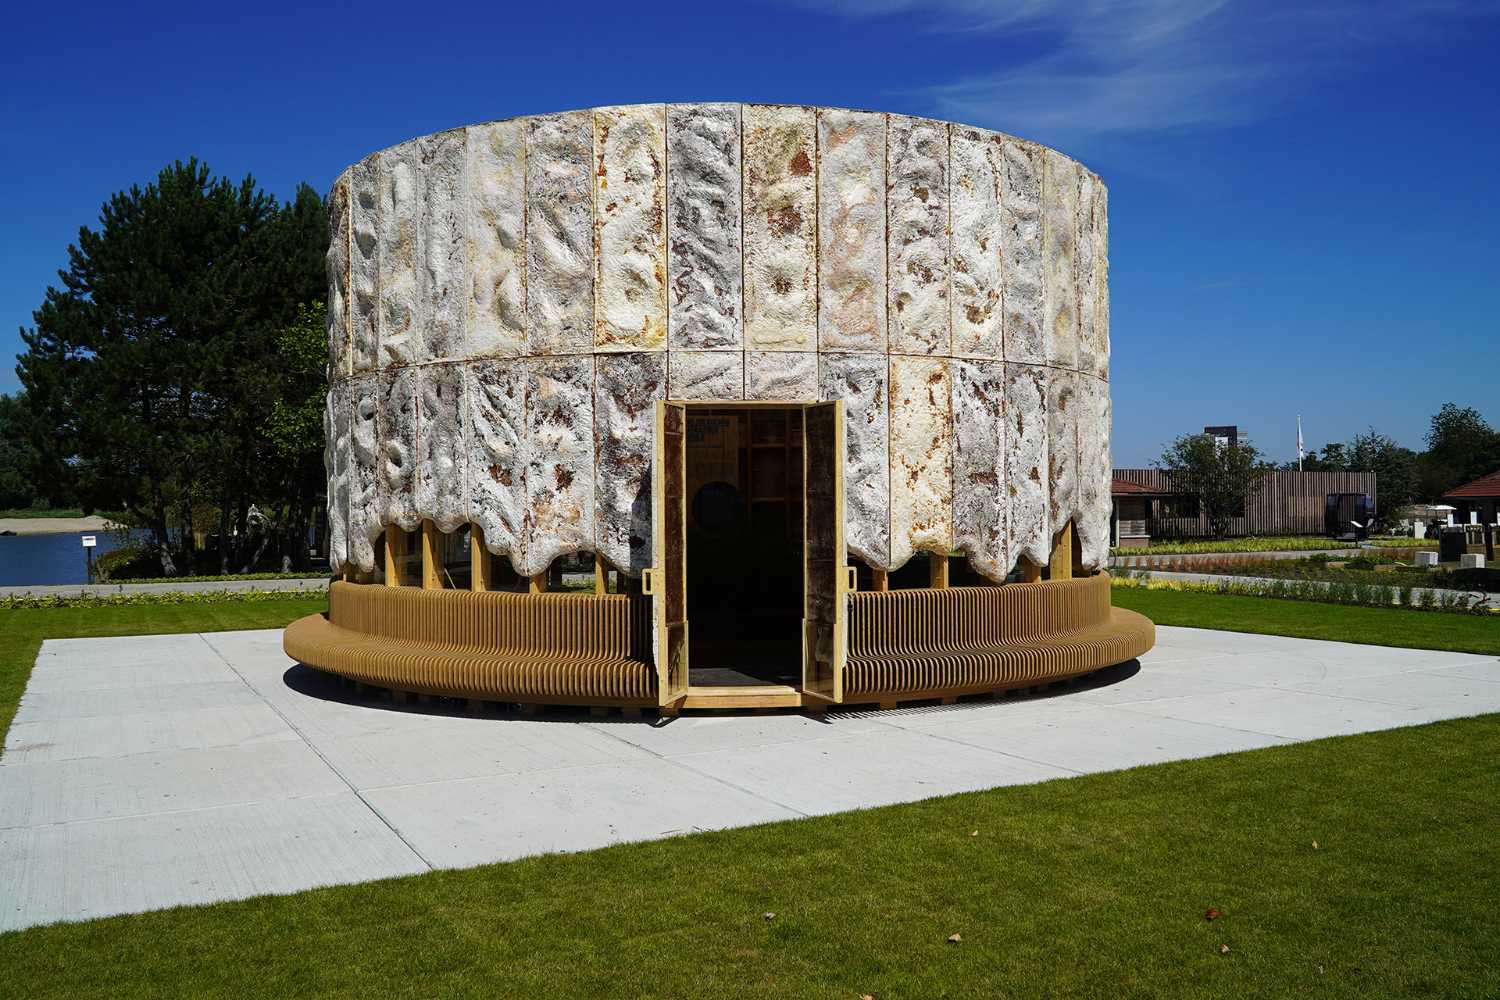 The Growing Pavilion and the new aesthetic of organic materials applied to design